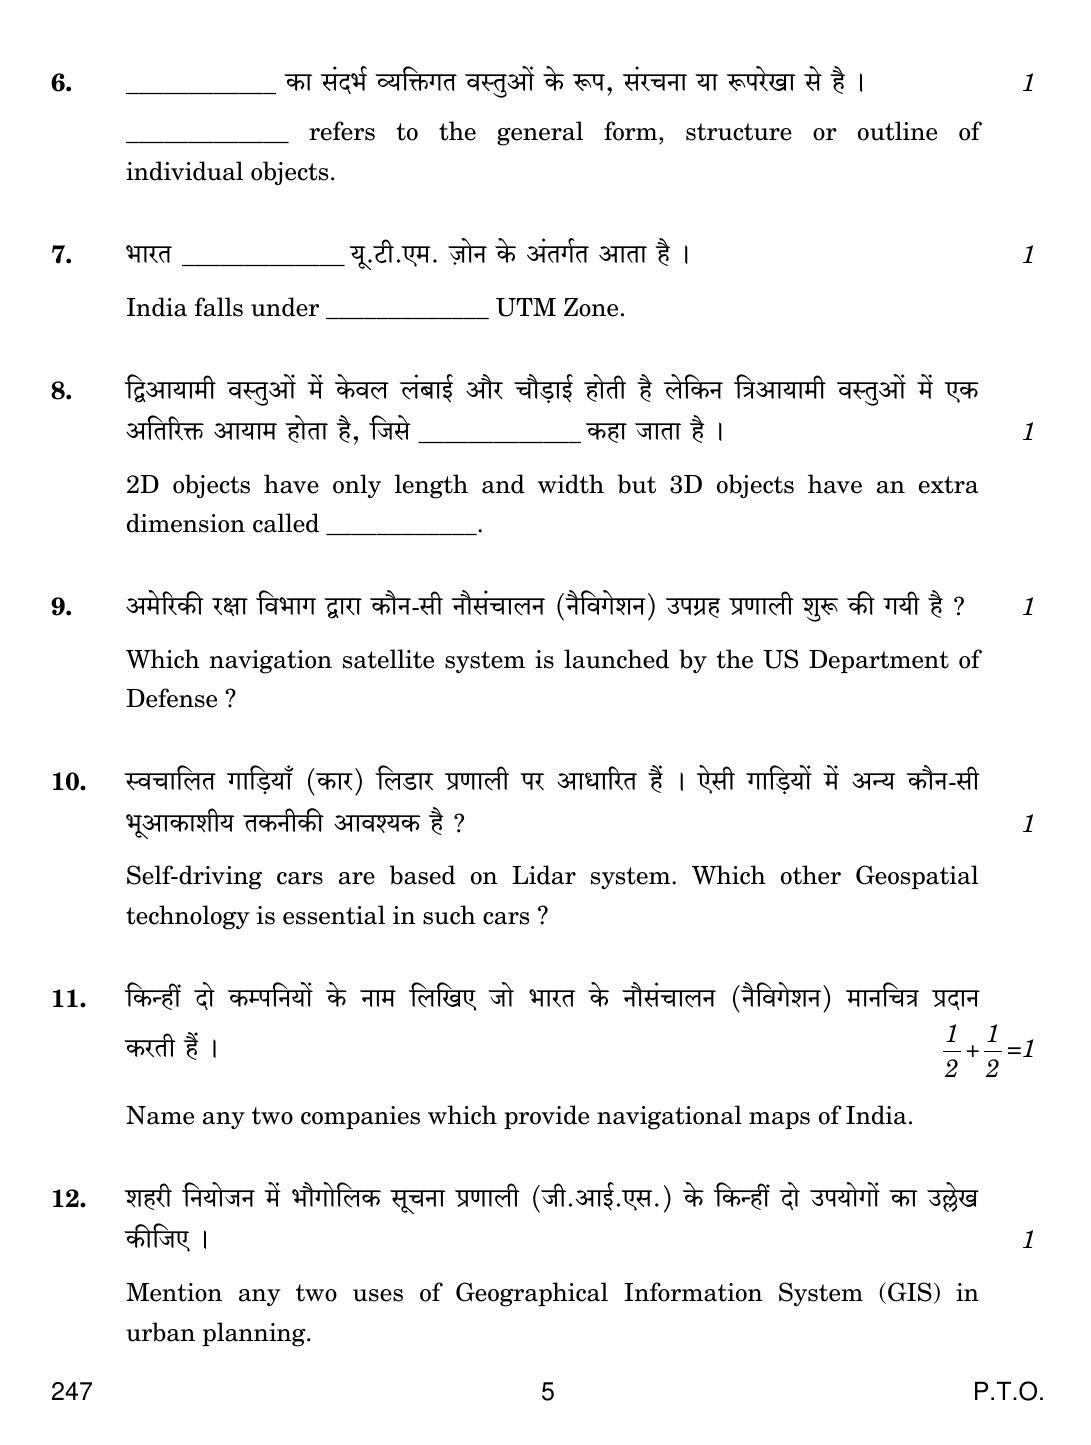 CBSE Class 12 247 Geospatial Technology 2019 Question Paper - Page 5